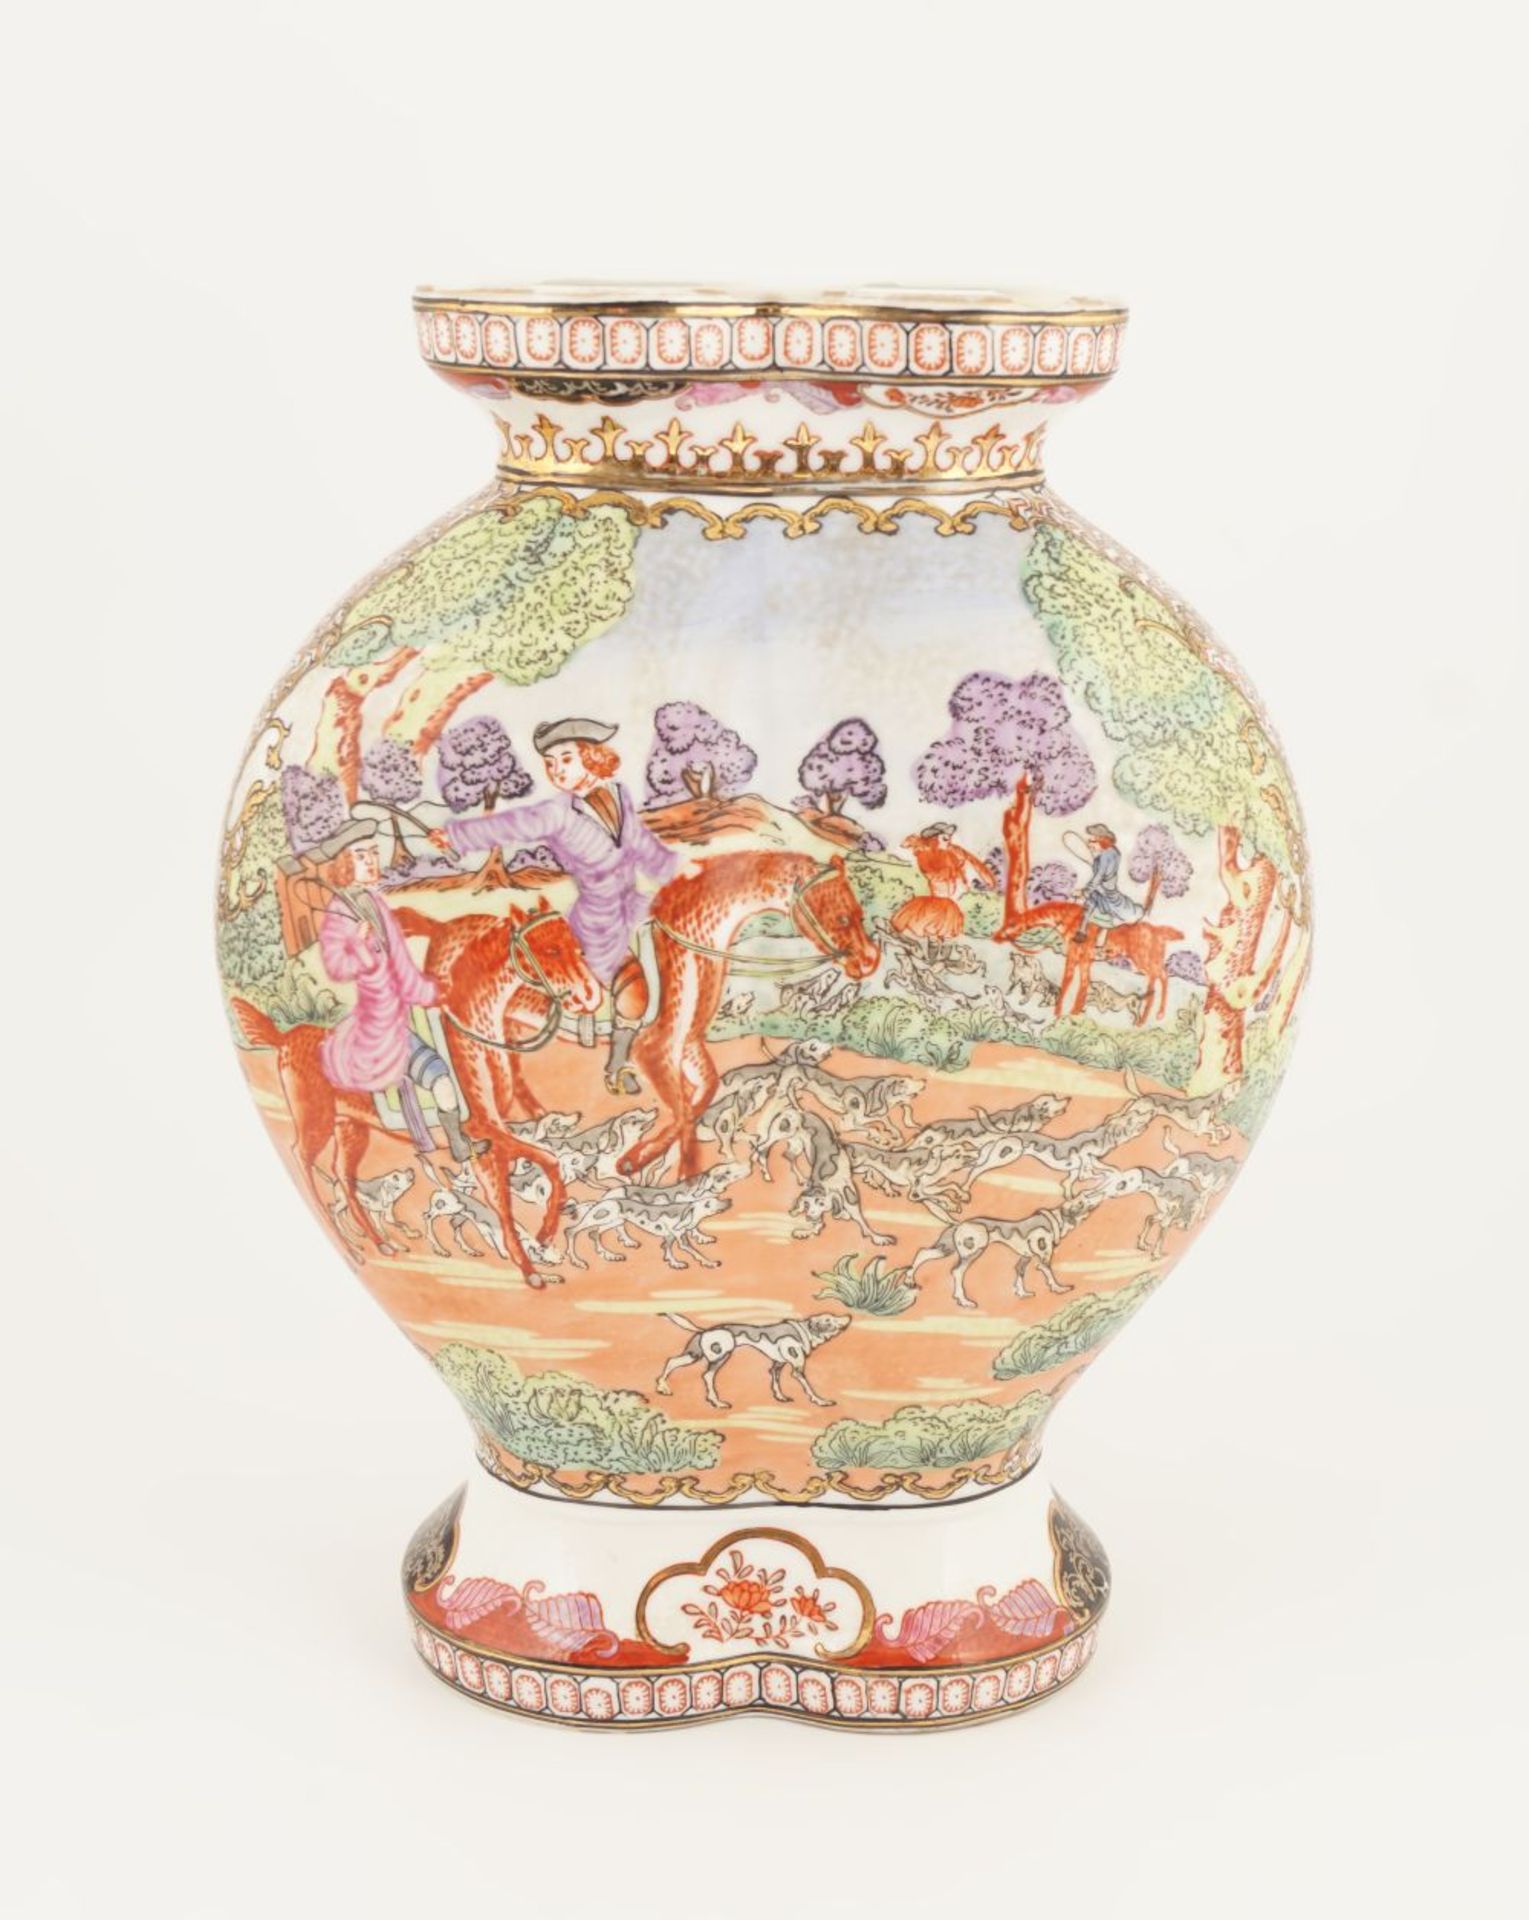 CHINESE QING EXPORT PORCELAIN VASE - Image 3 of 4